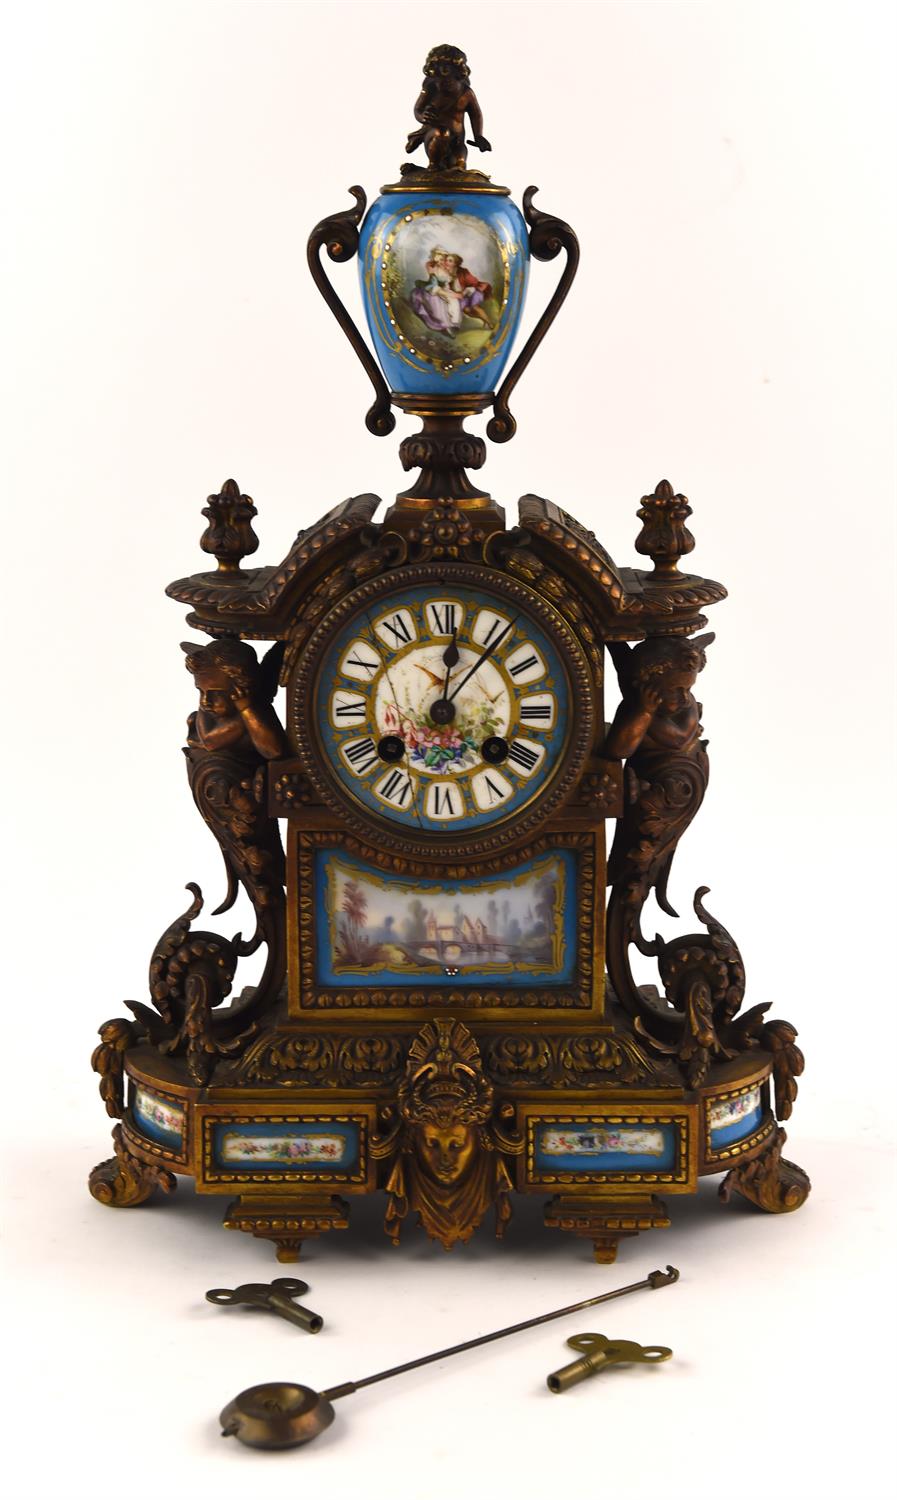 A late 19th century French Ormolu and porcelain mounted mantel clock, with urn finial and painted